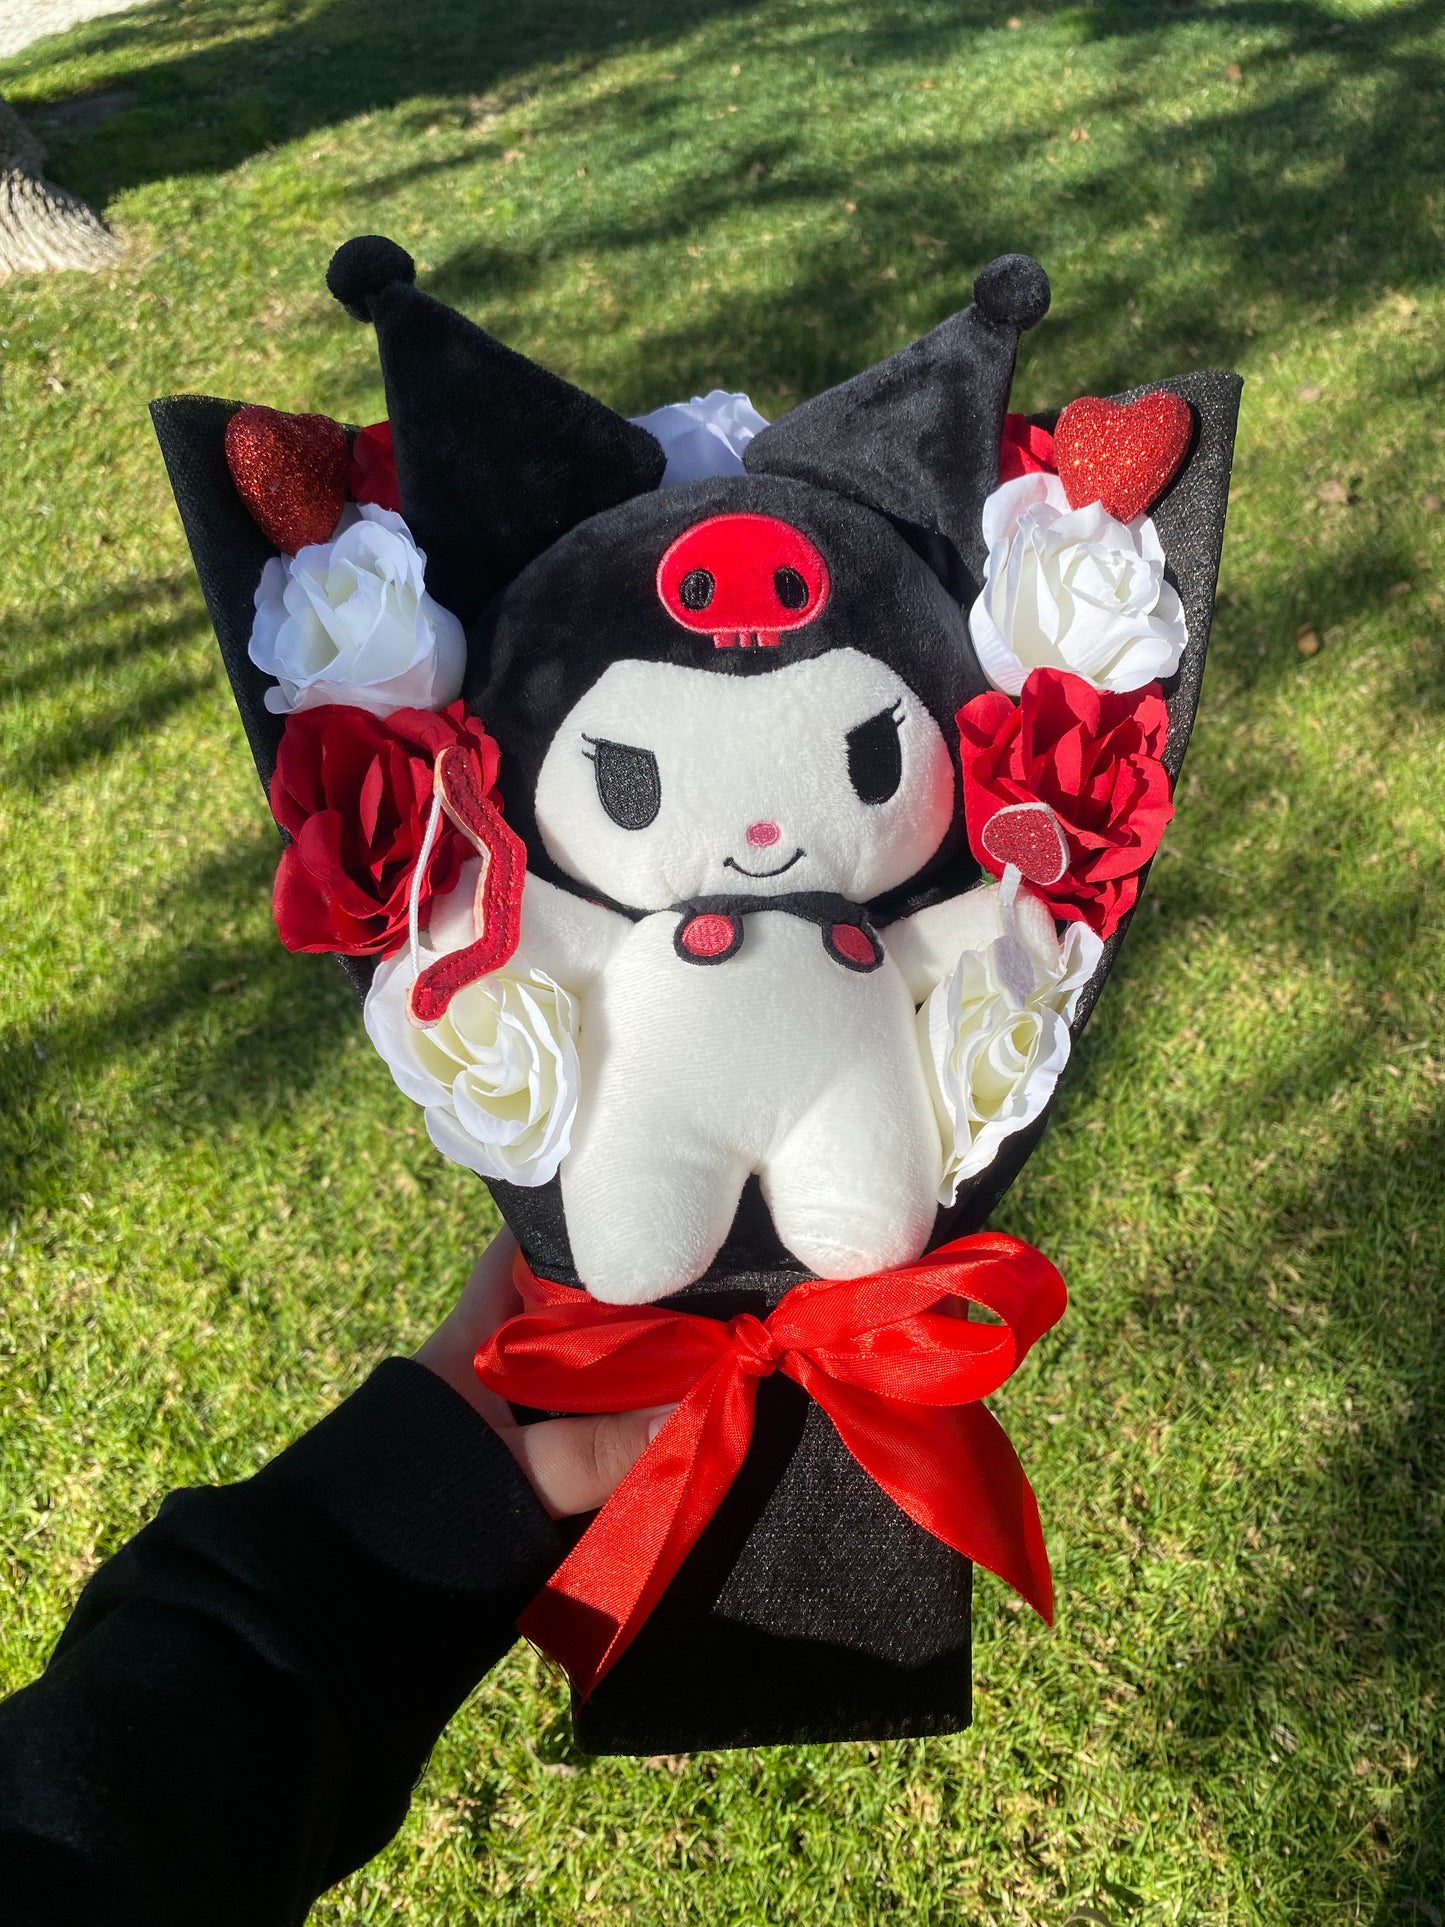 black and red big artificial plush bouquet